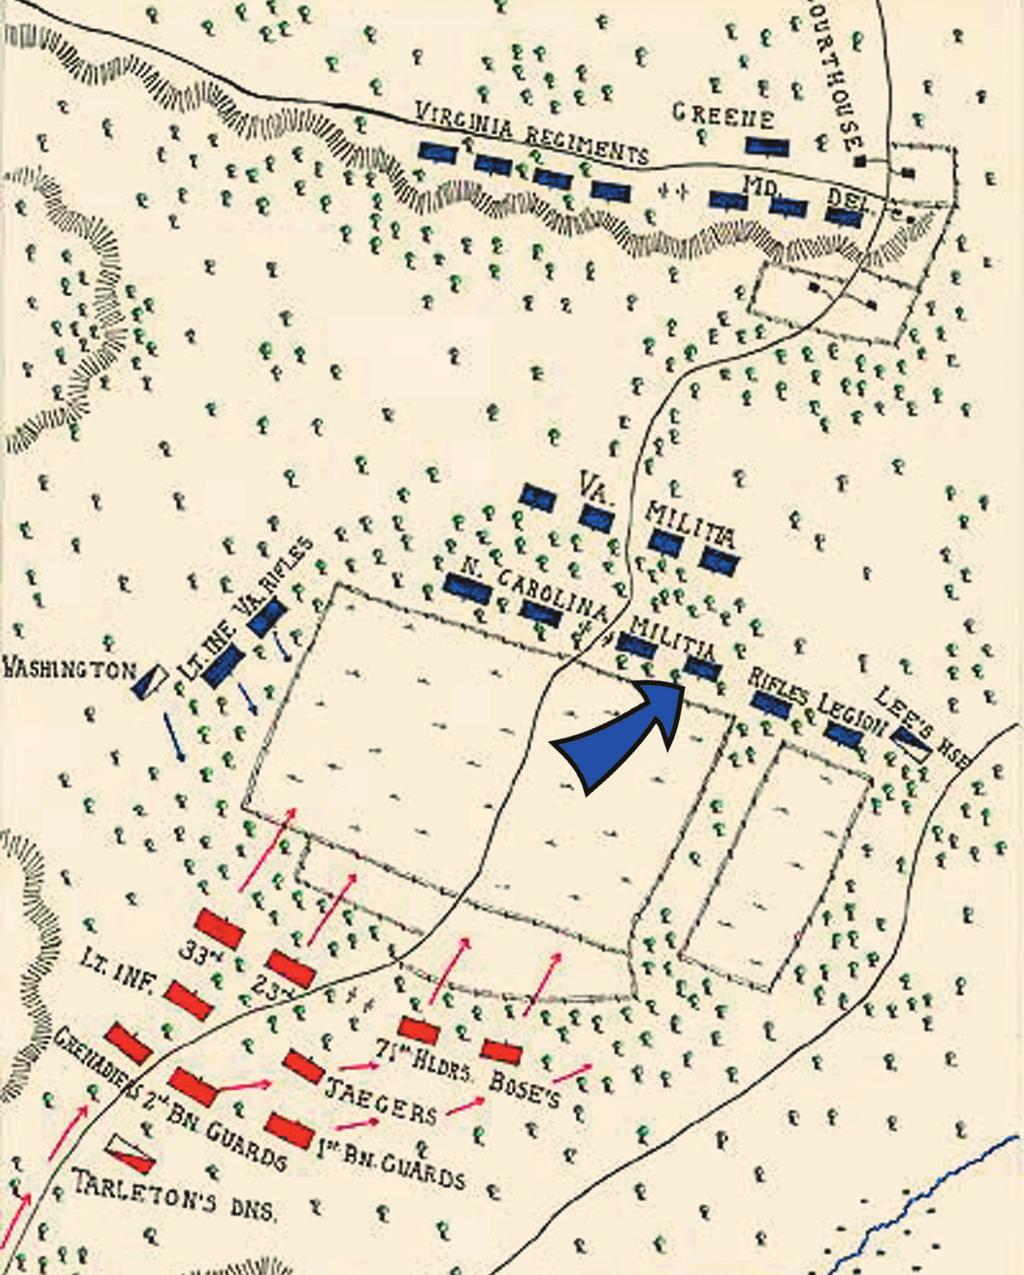 We know further that the battle was fought very near the homes of several McCuistion and McCuiston family members.